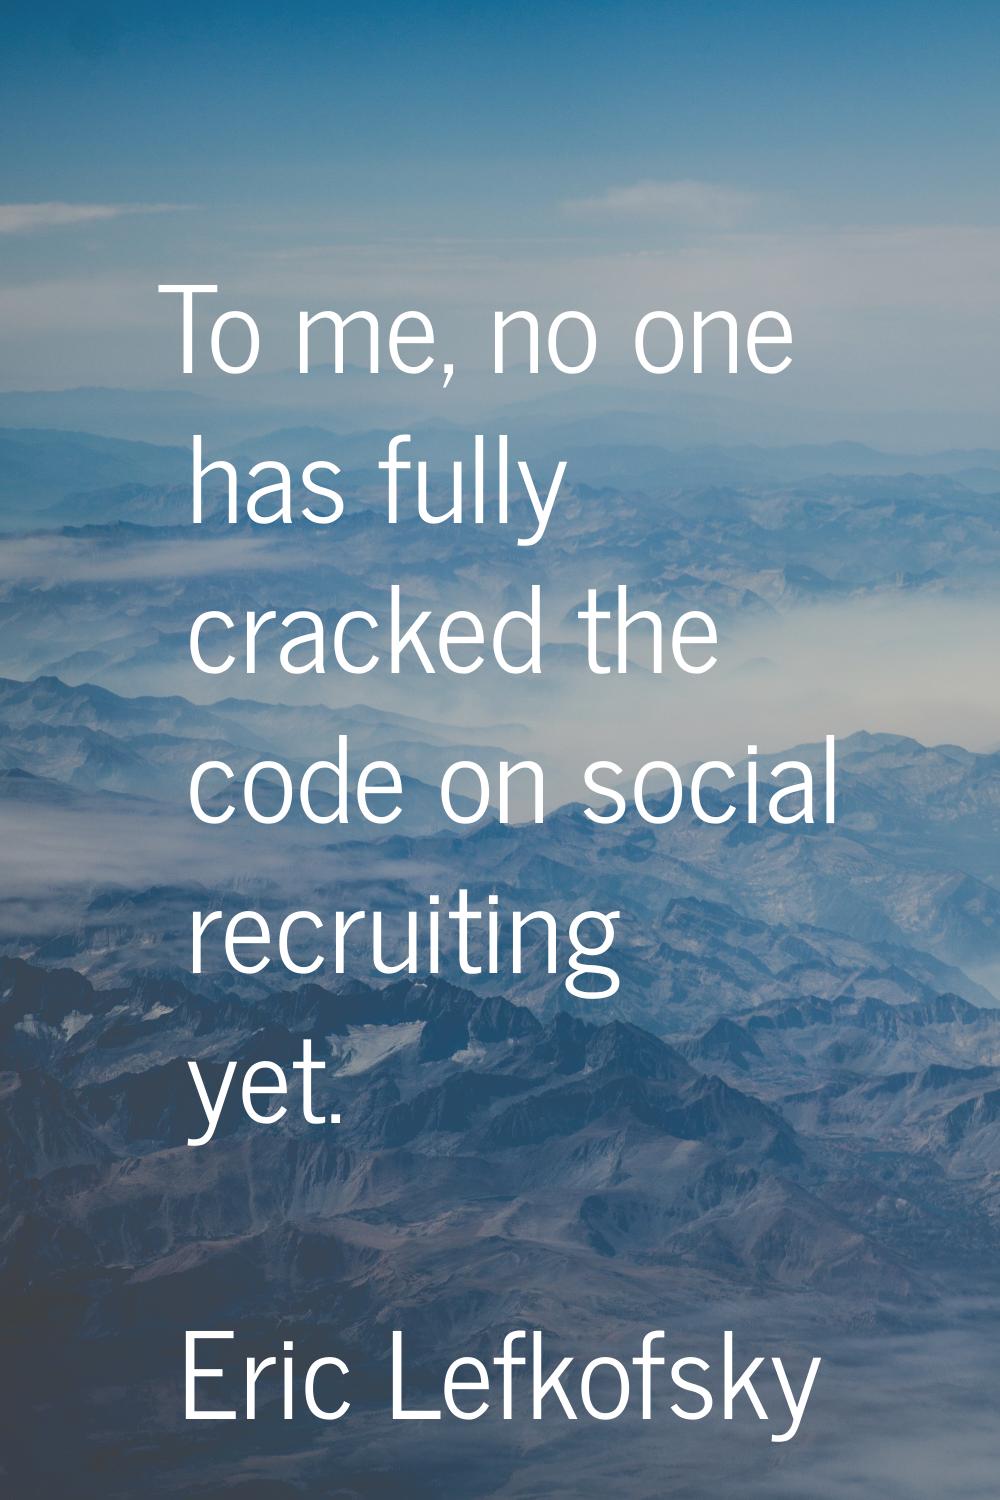 To me, no one has fully cracked the code on social recruiting yet.